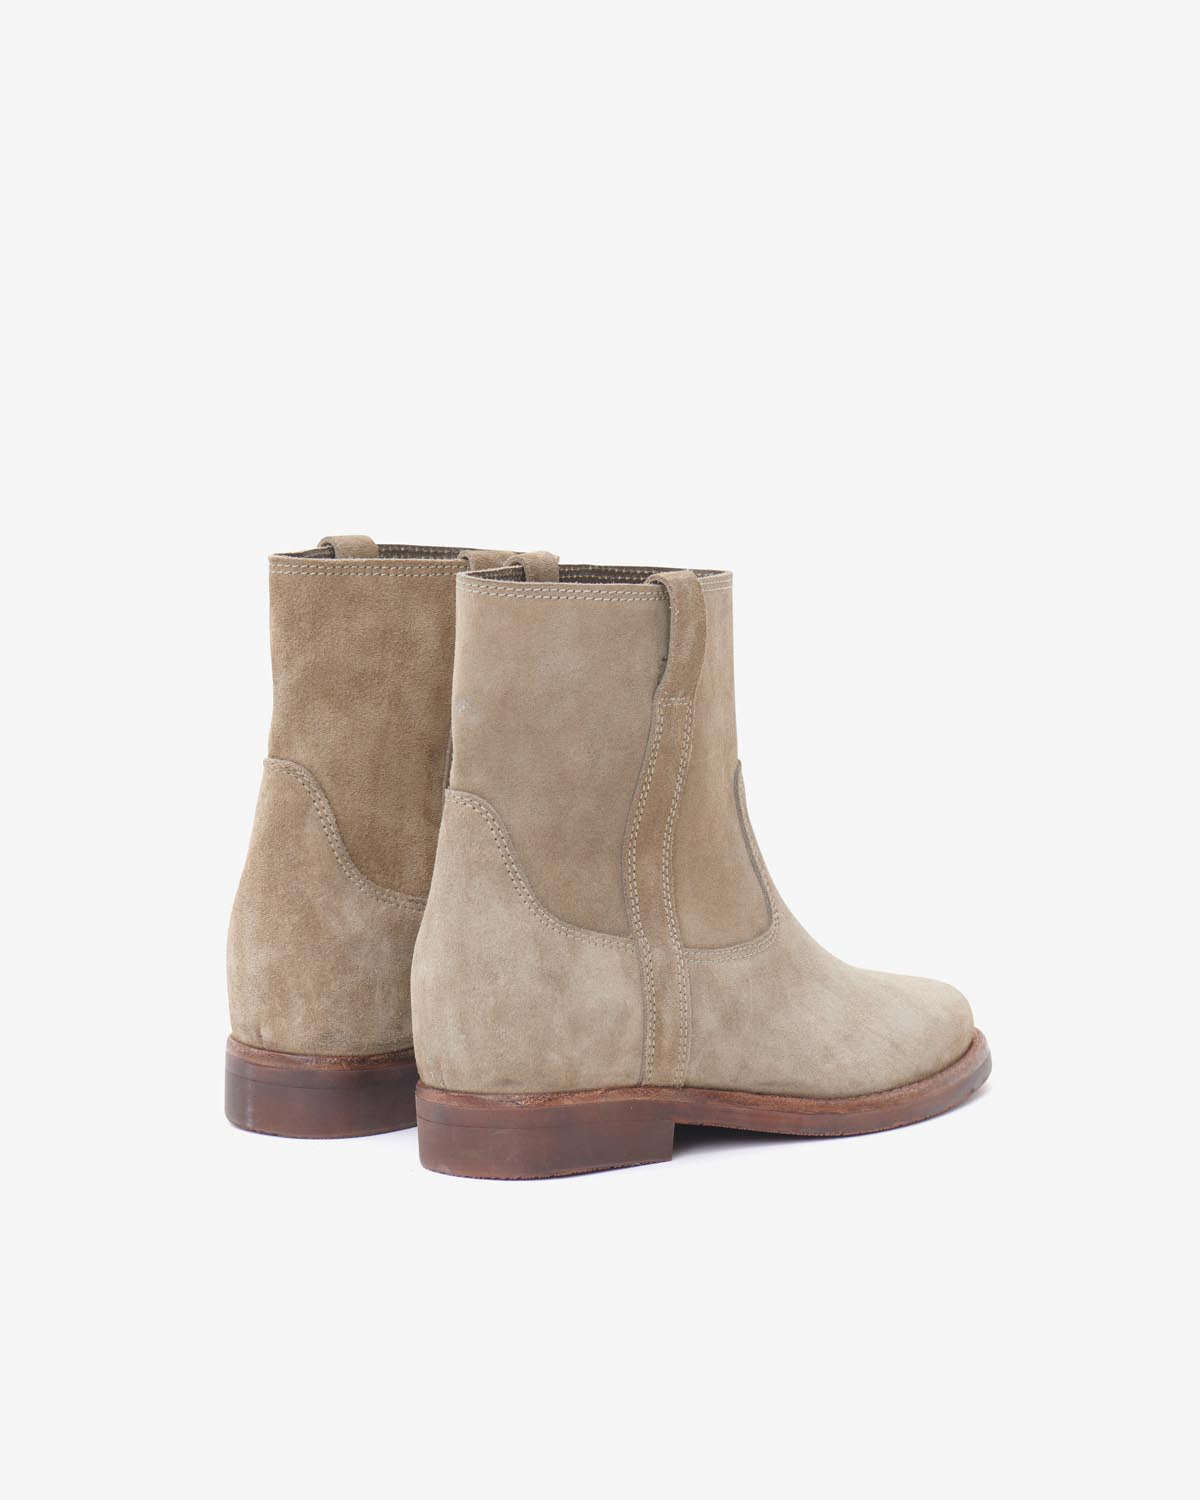 Boots susee Woman Taupe 2